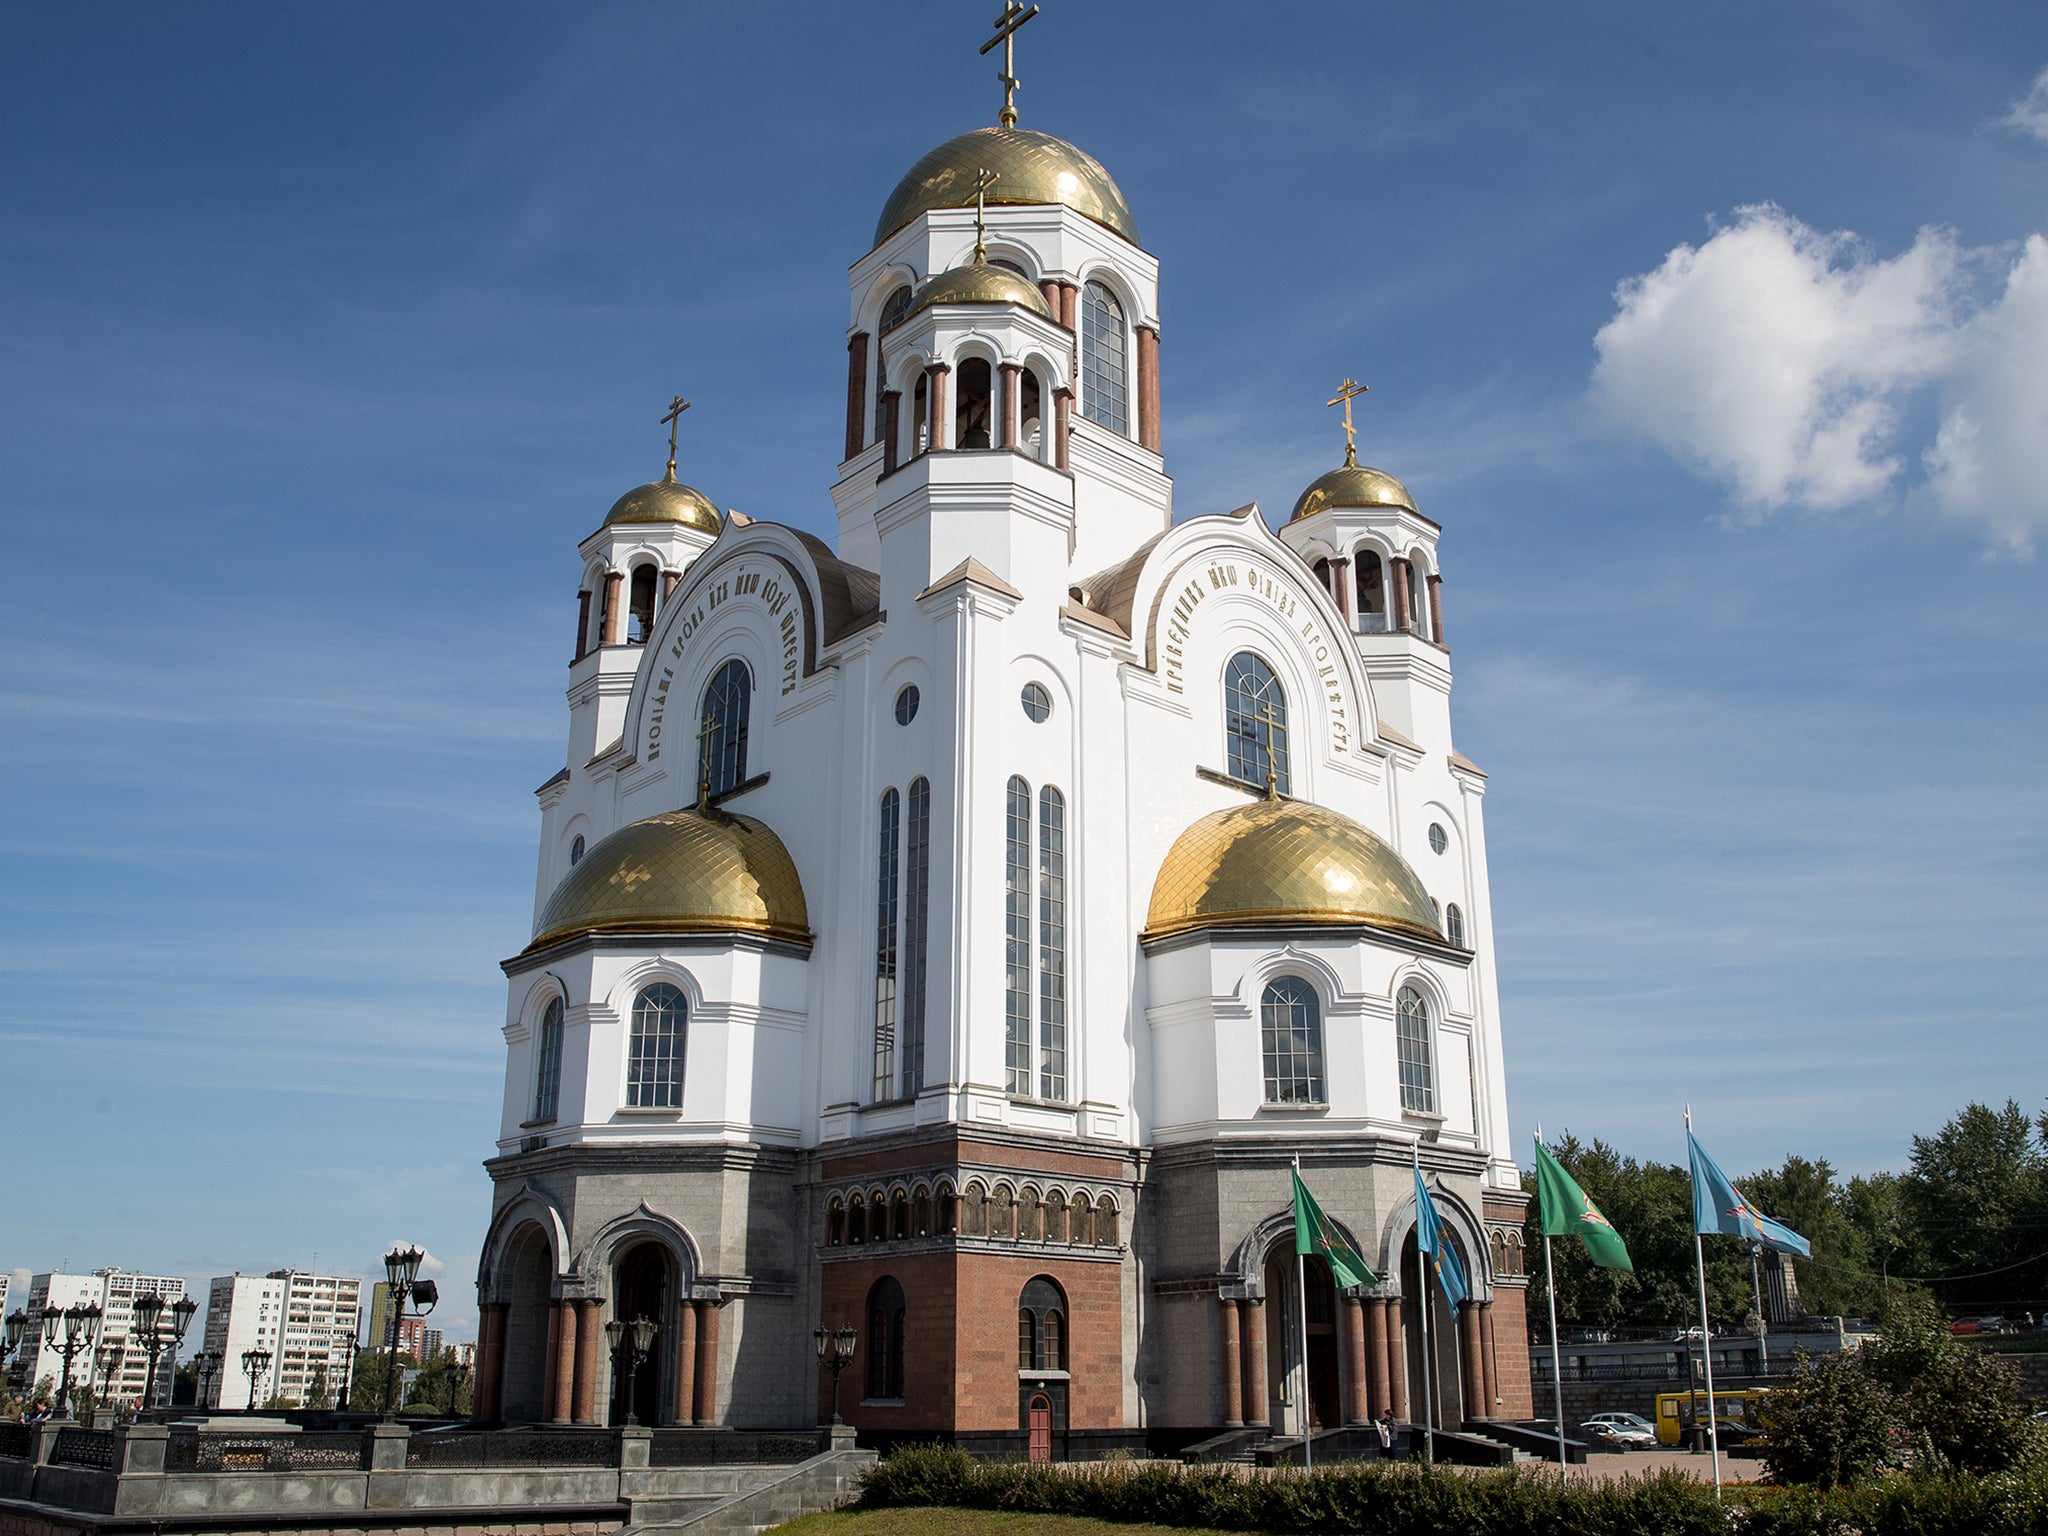 Church built on the site where the last tsar of Russia and his family were killed